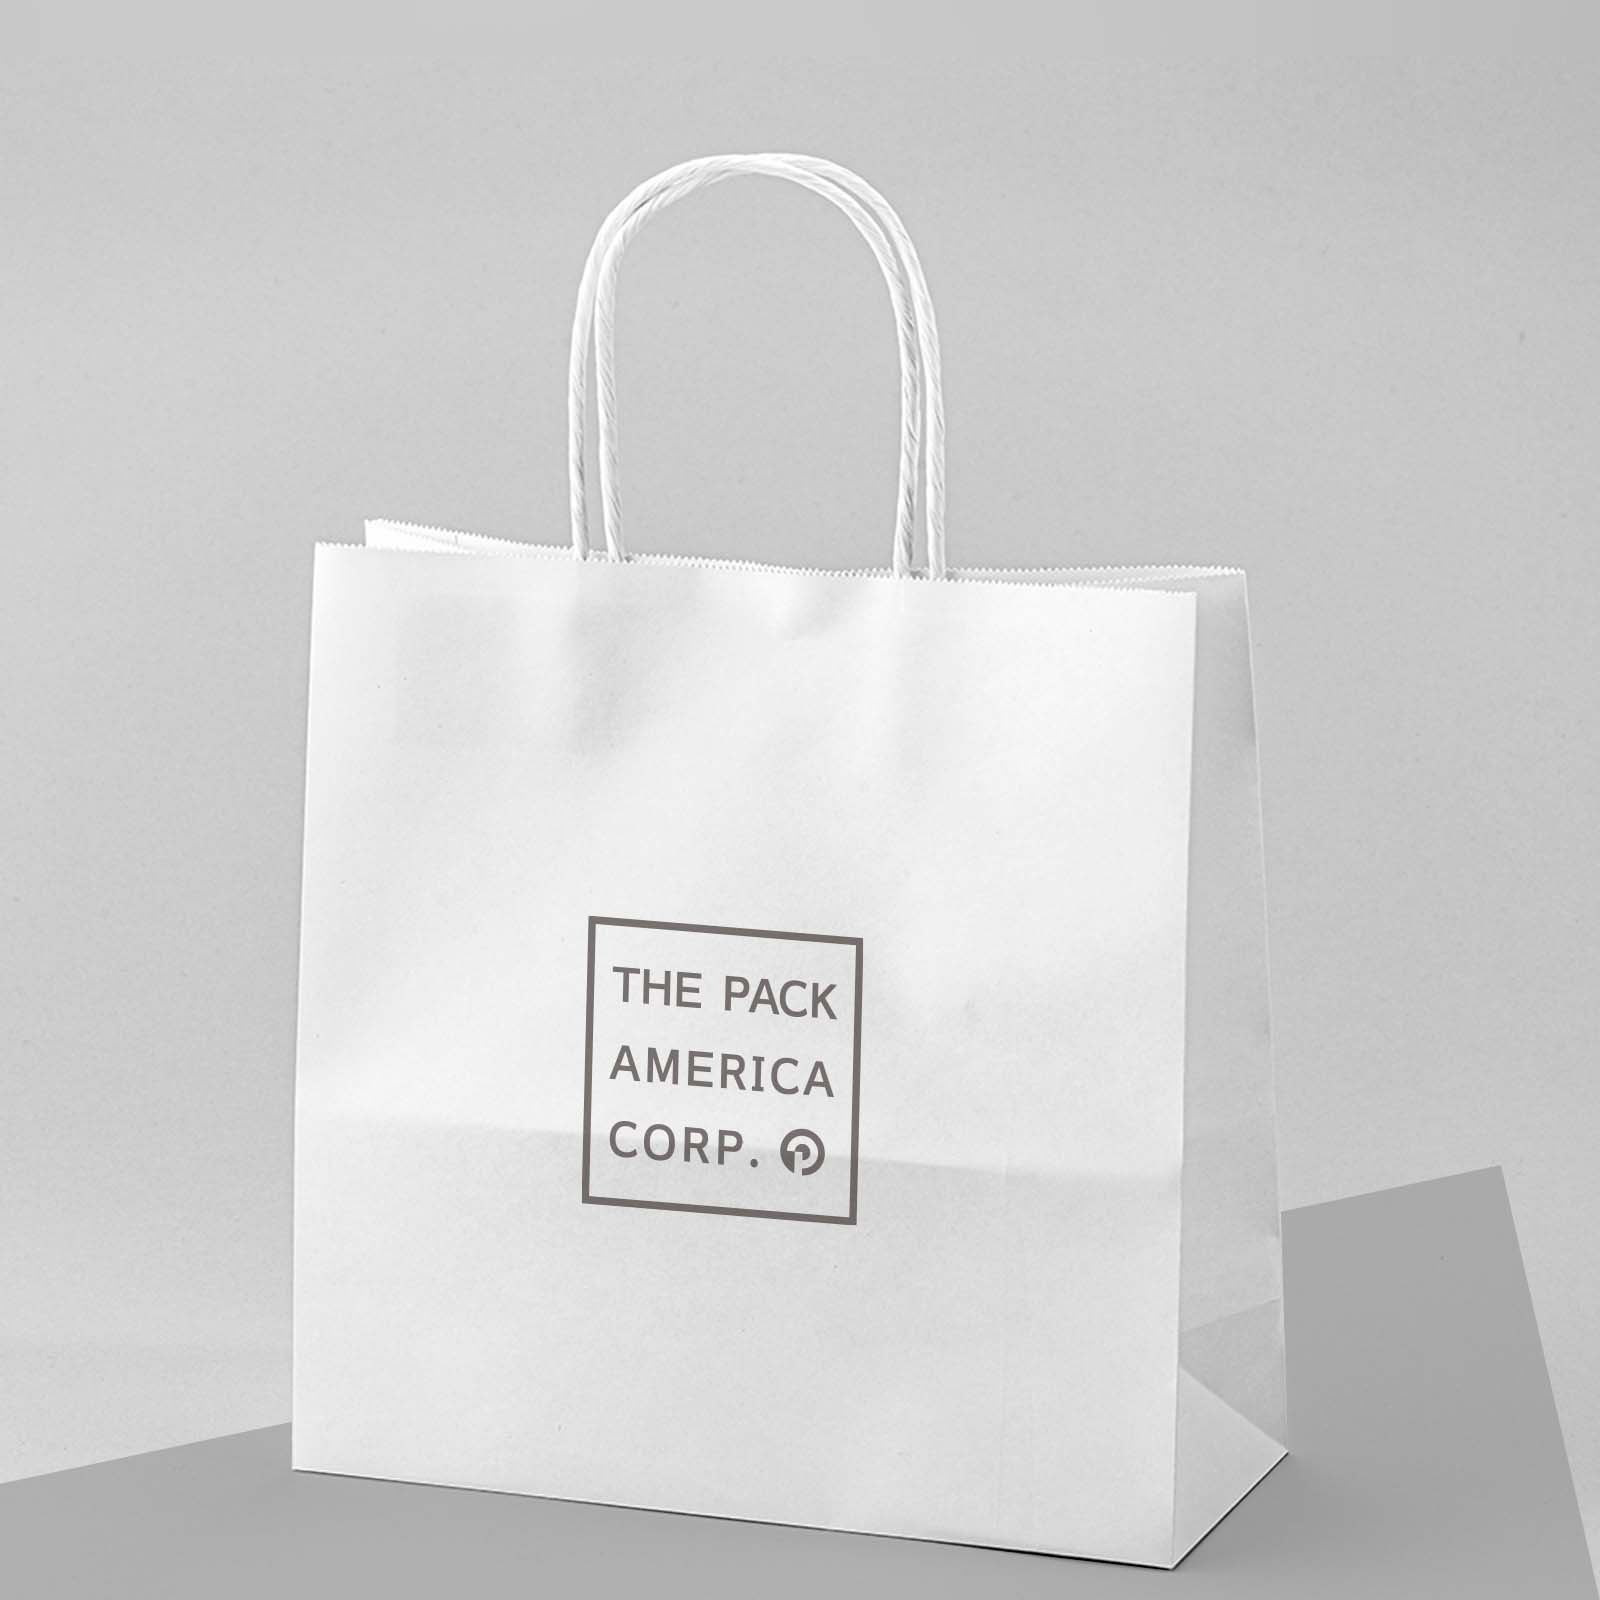 Paper Shopping Bags w/ Twisted Paper Handles